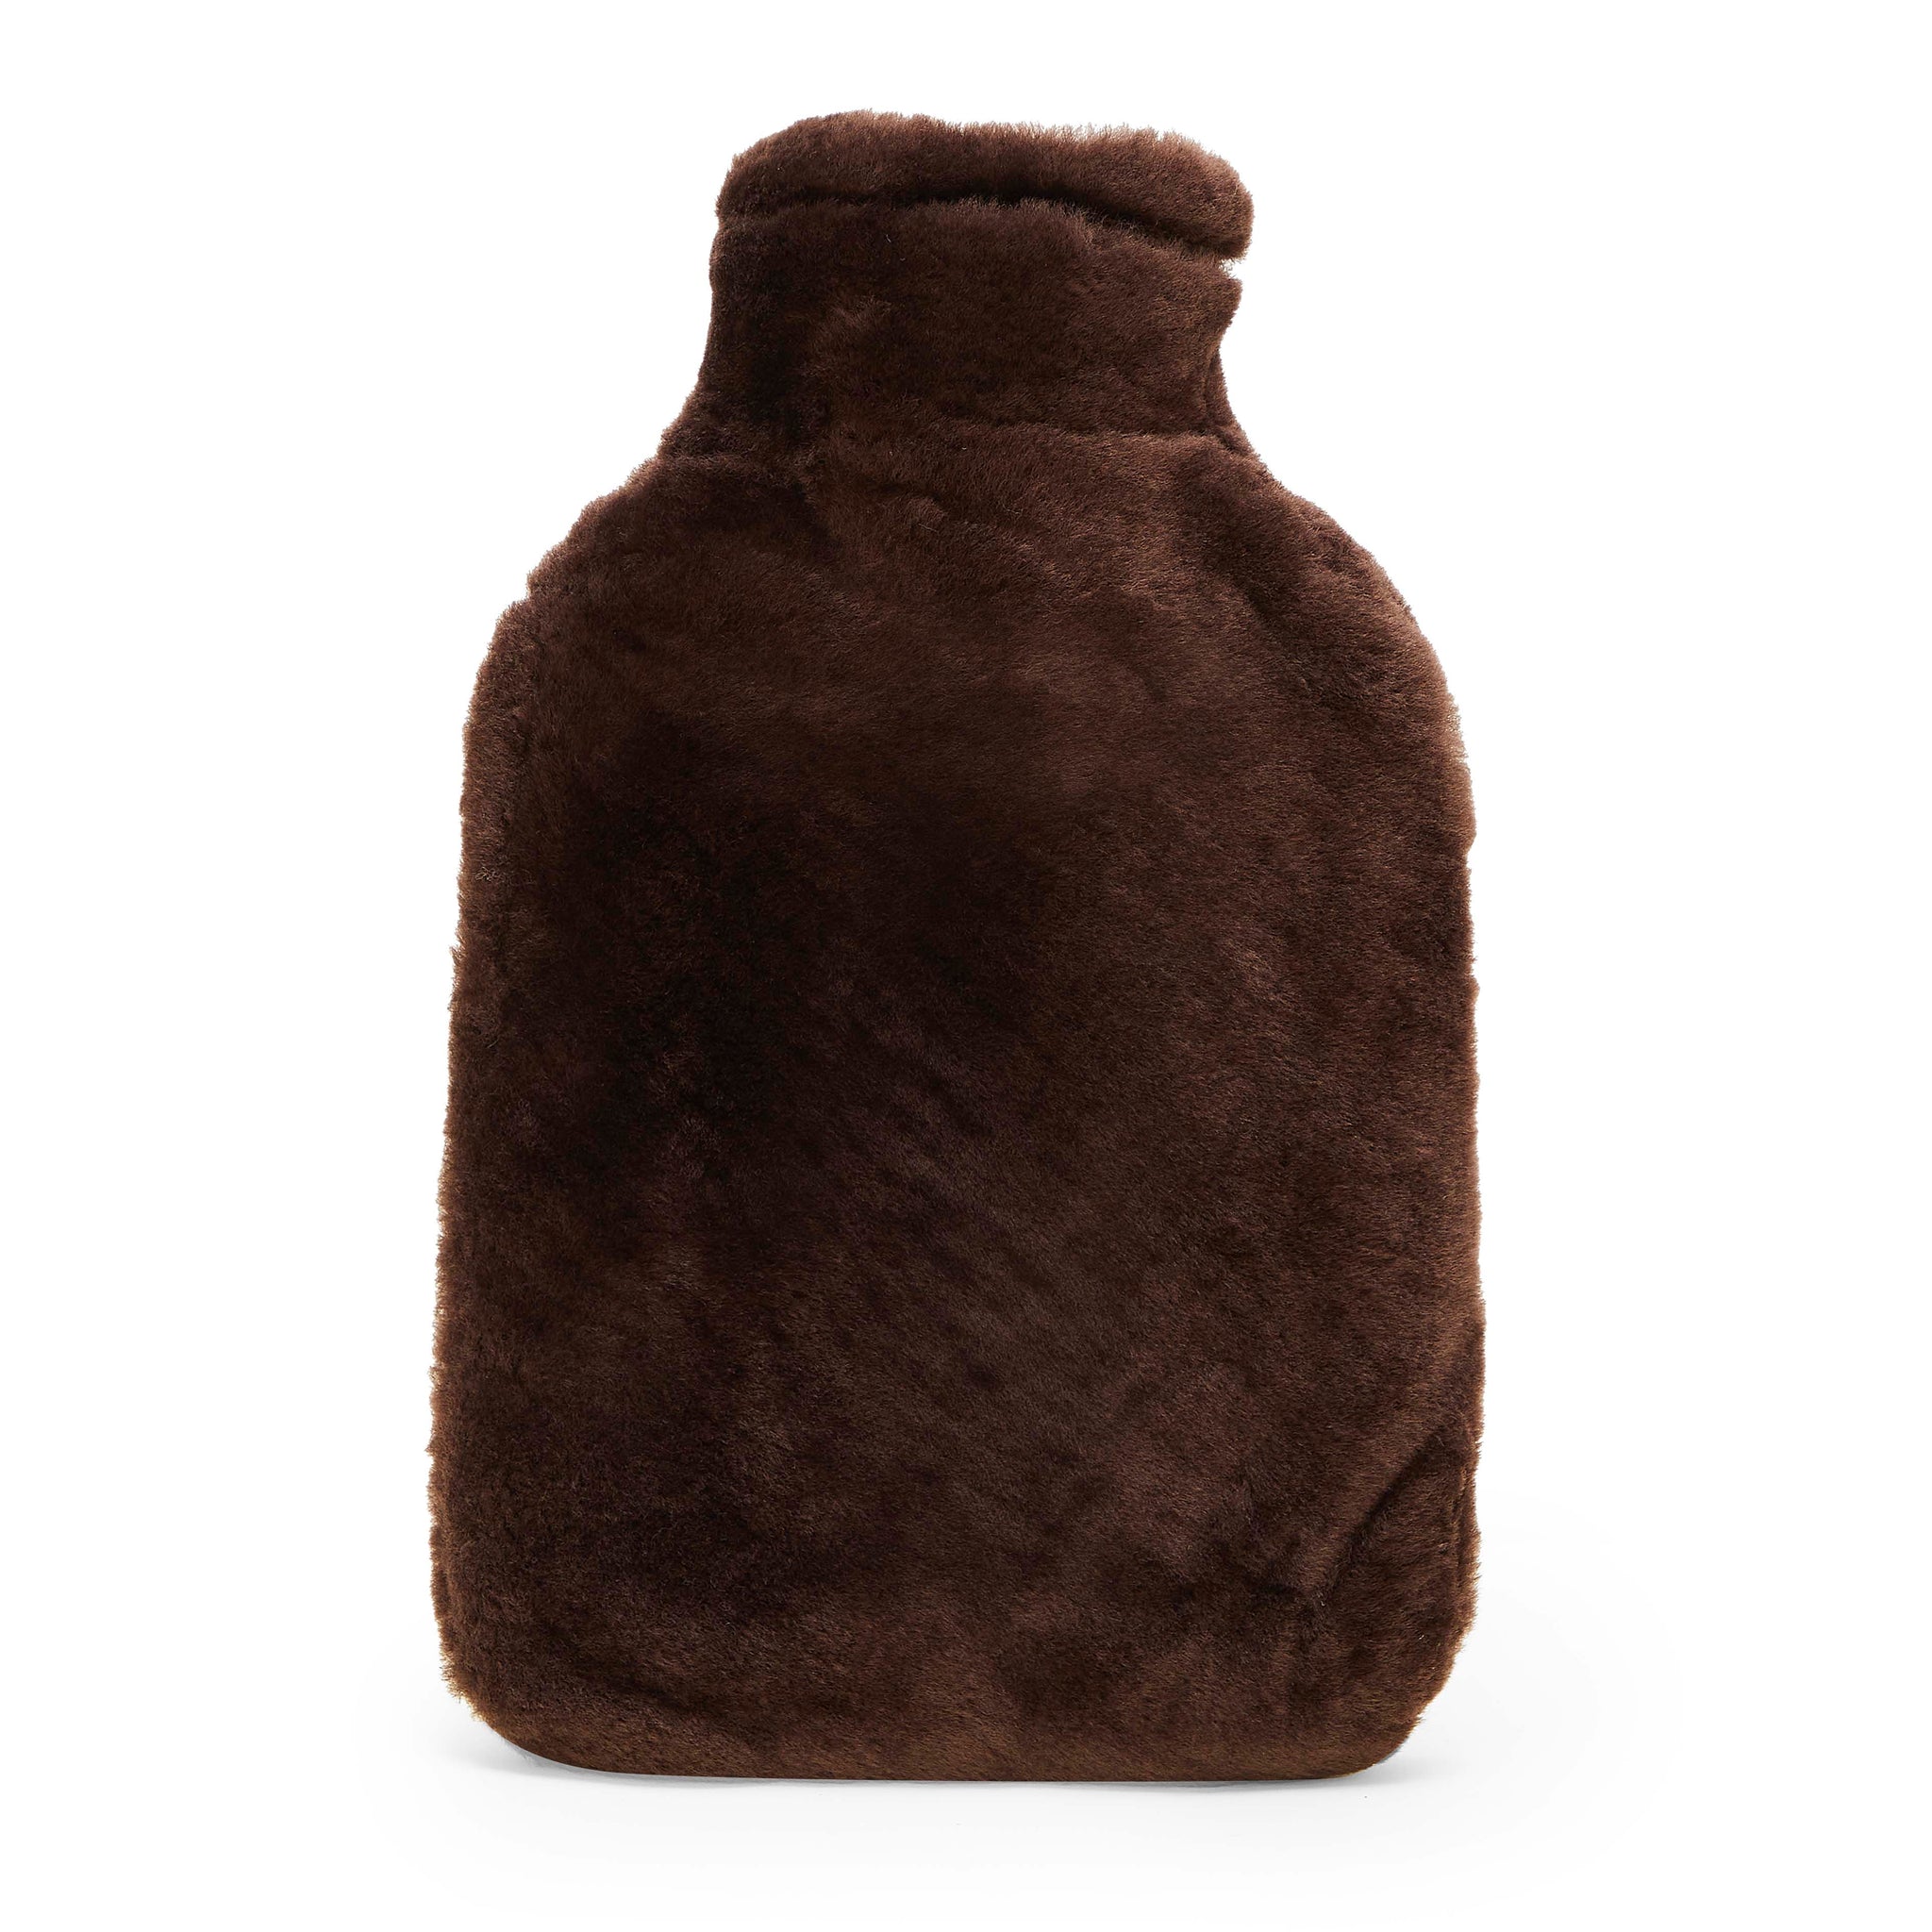 Chocolate Brown Hot Water Bottle